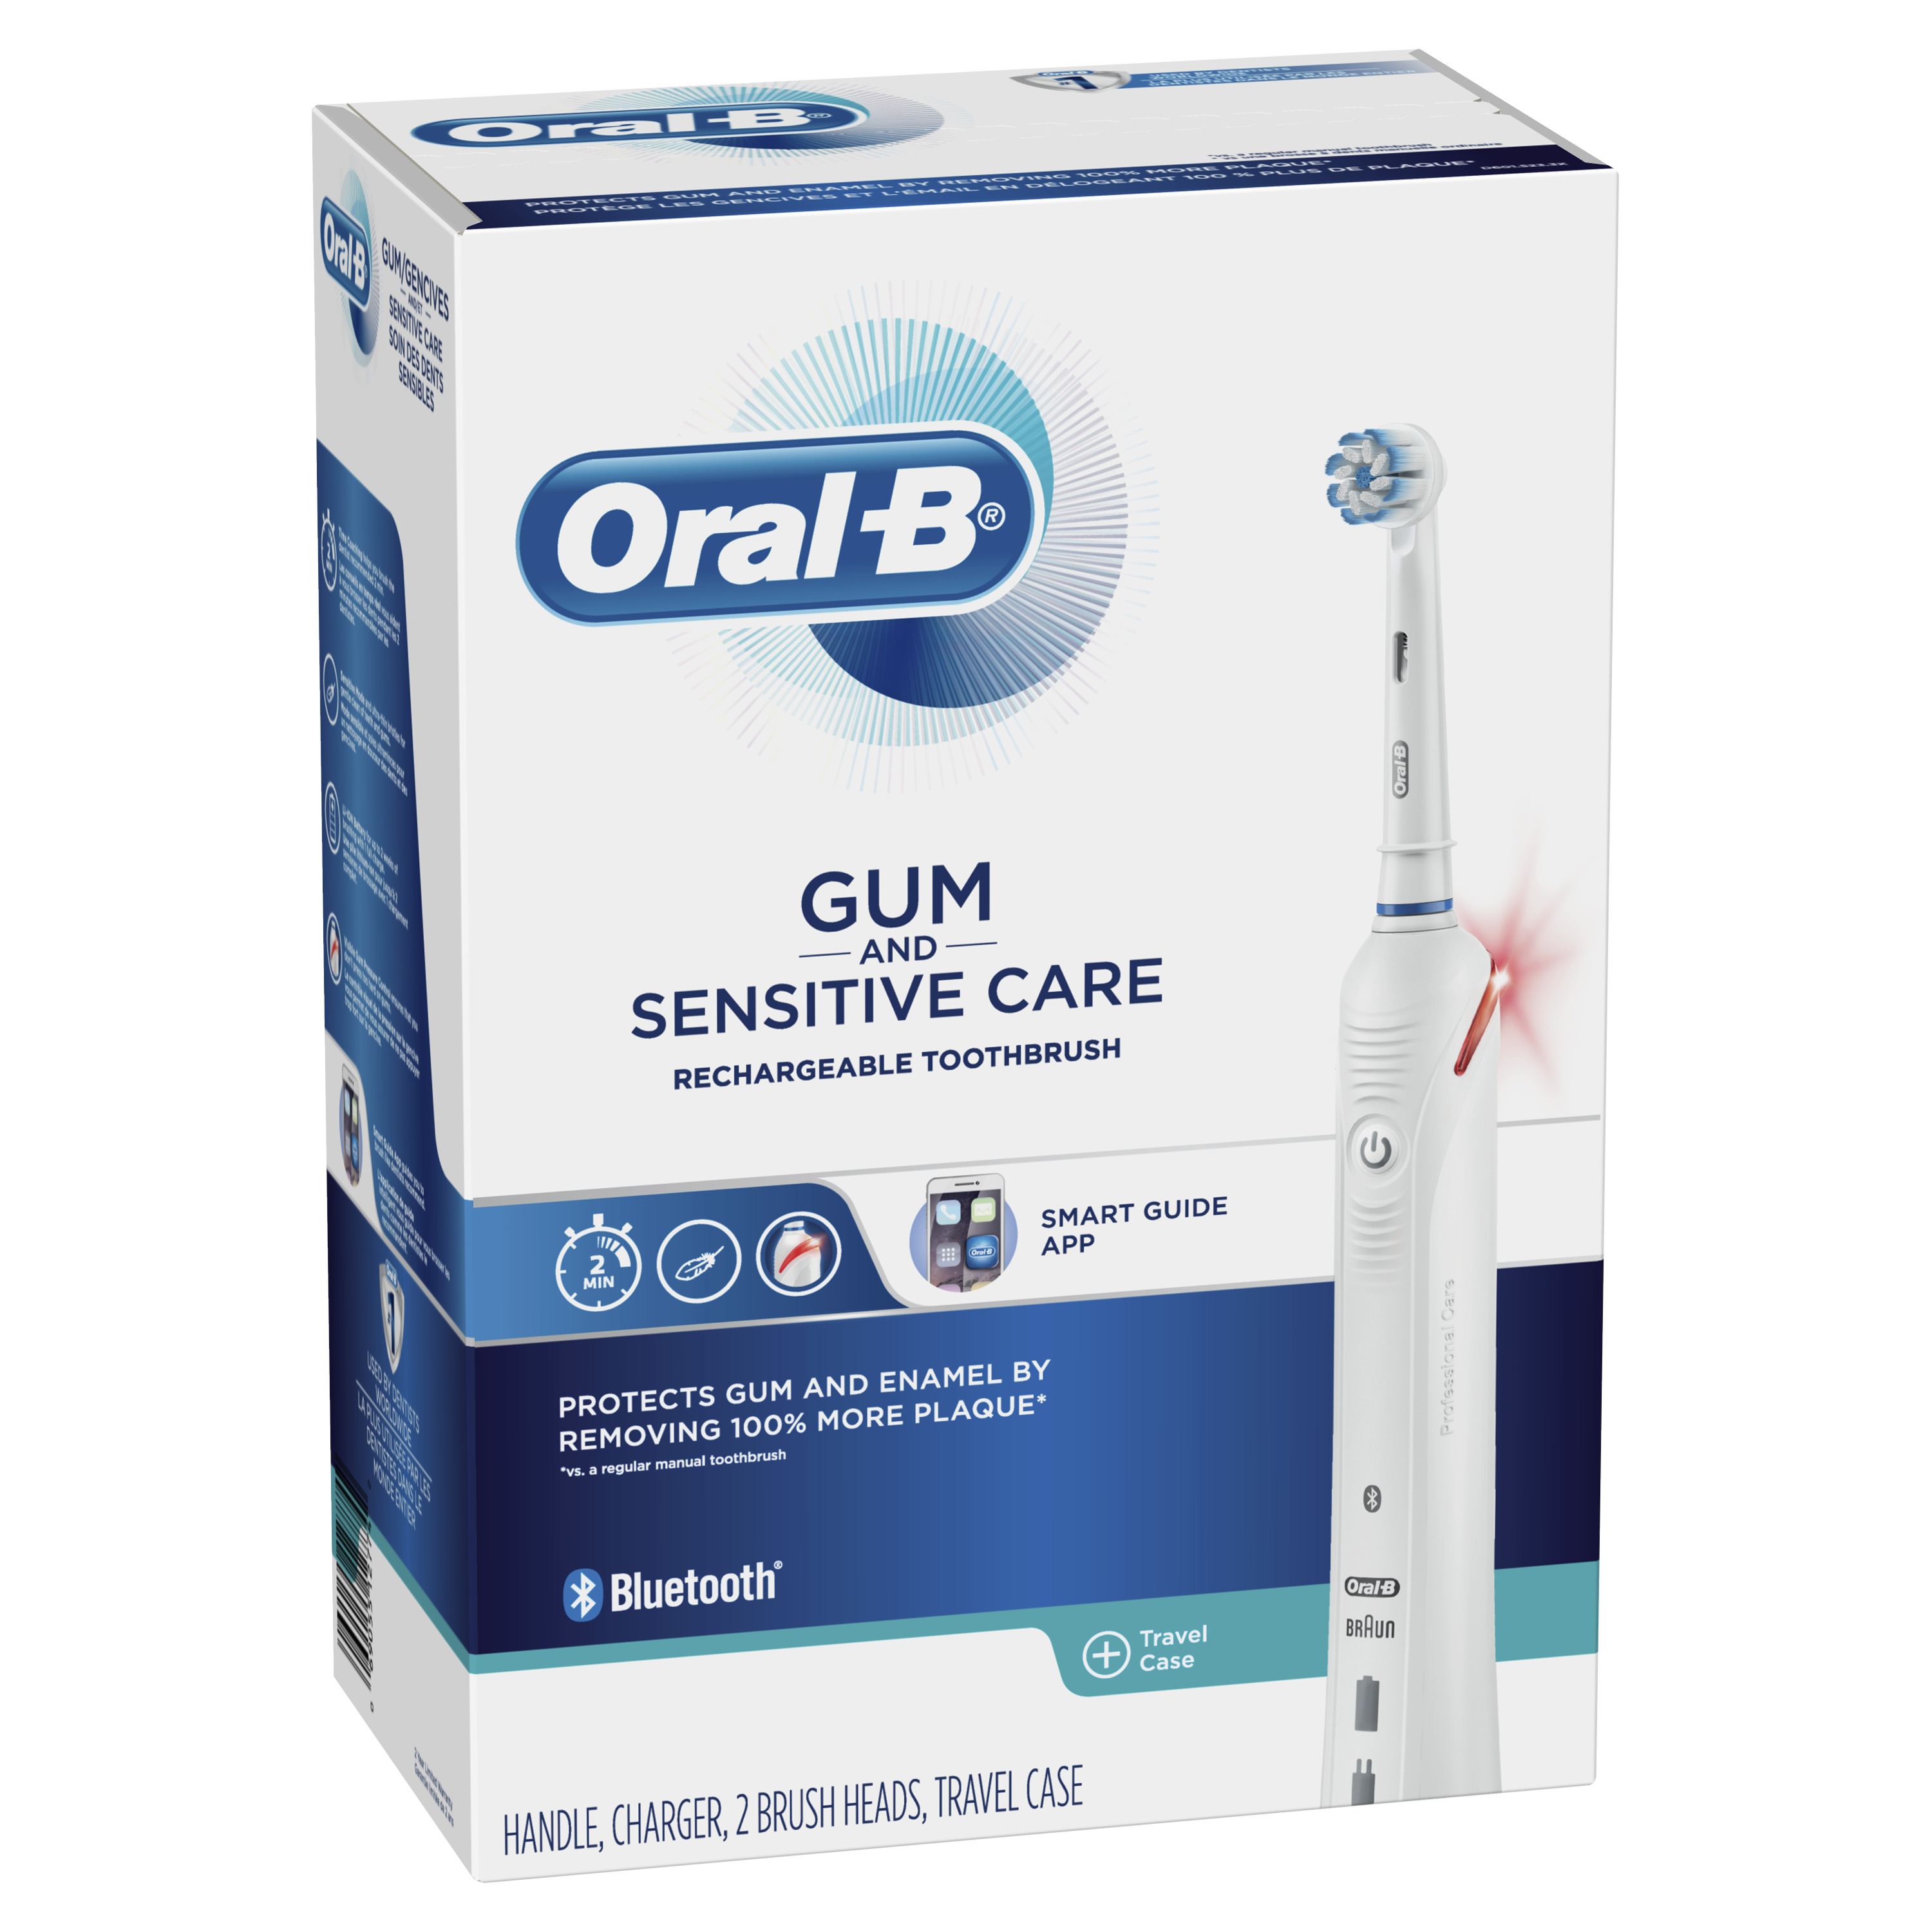 Oral-B Gum and Sensitive Care Rechargeable Electric Toothbrush, White - image 2 of 12